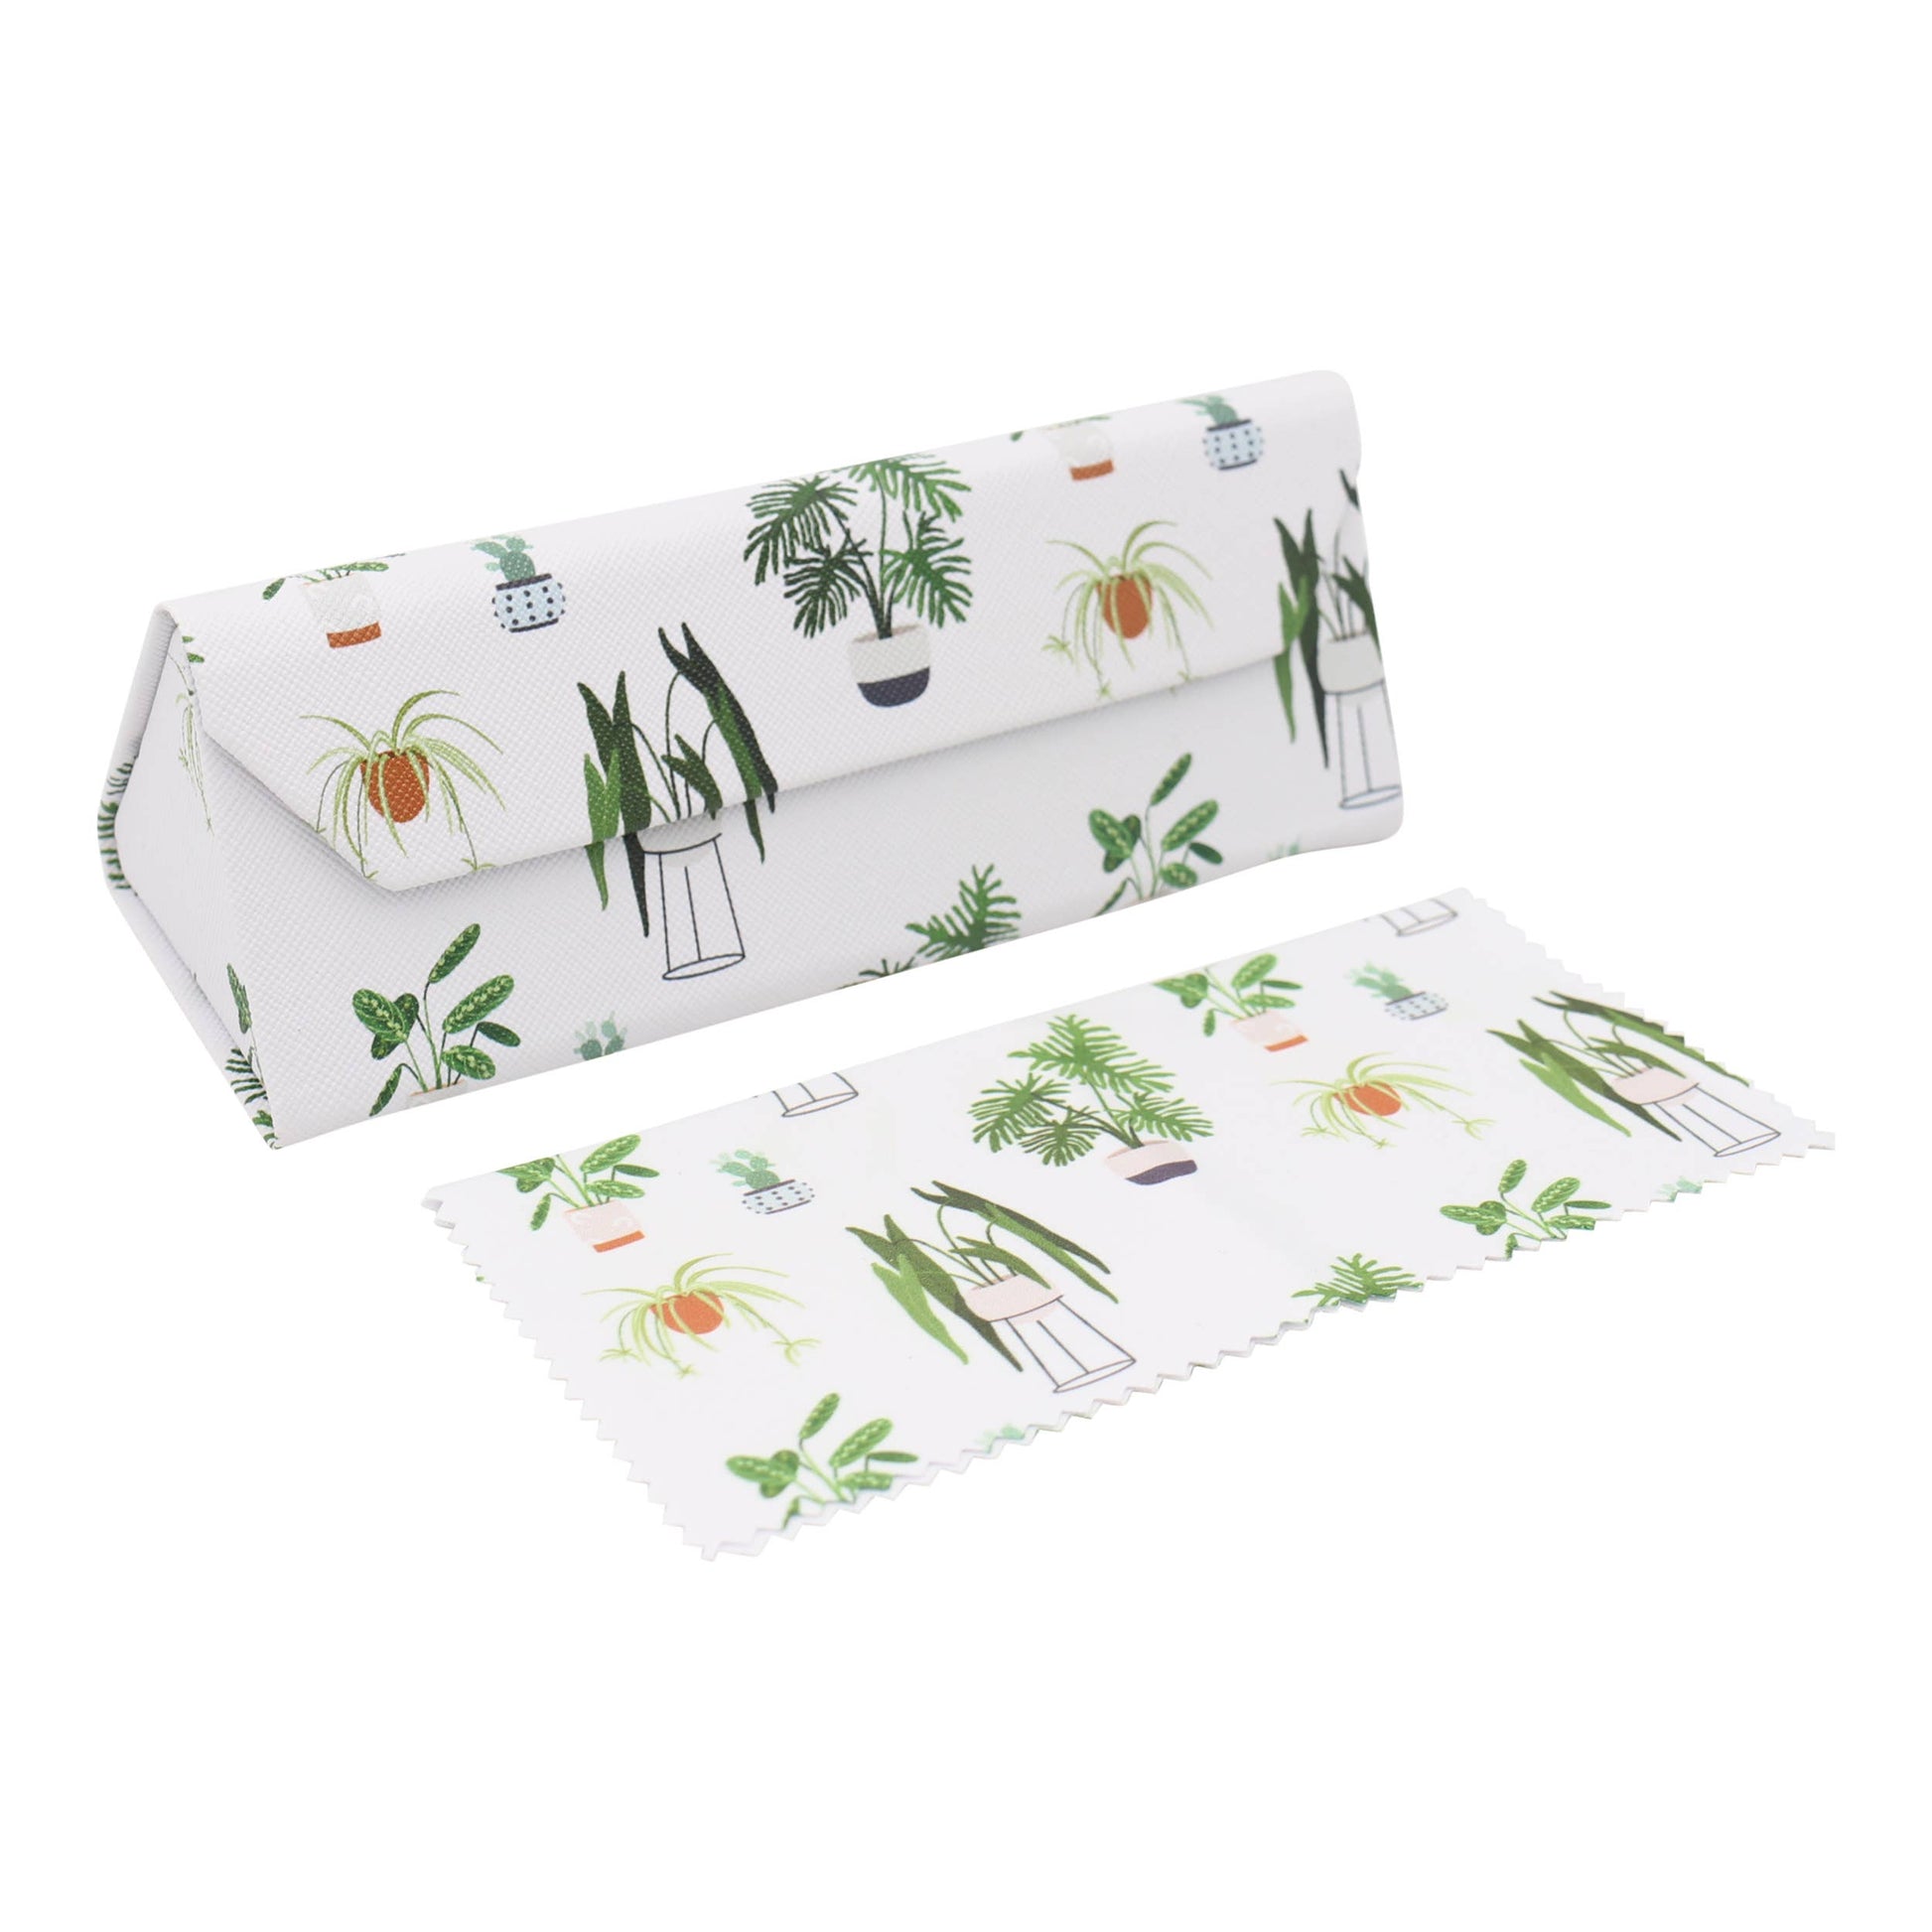 Image of Real Sic House Plants Glasses Case With Cleaning Cloth for Eyeglasses, Sunglasses